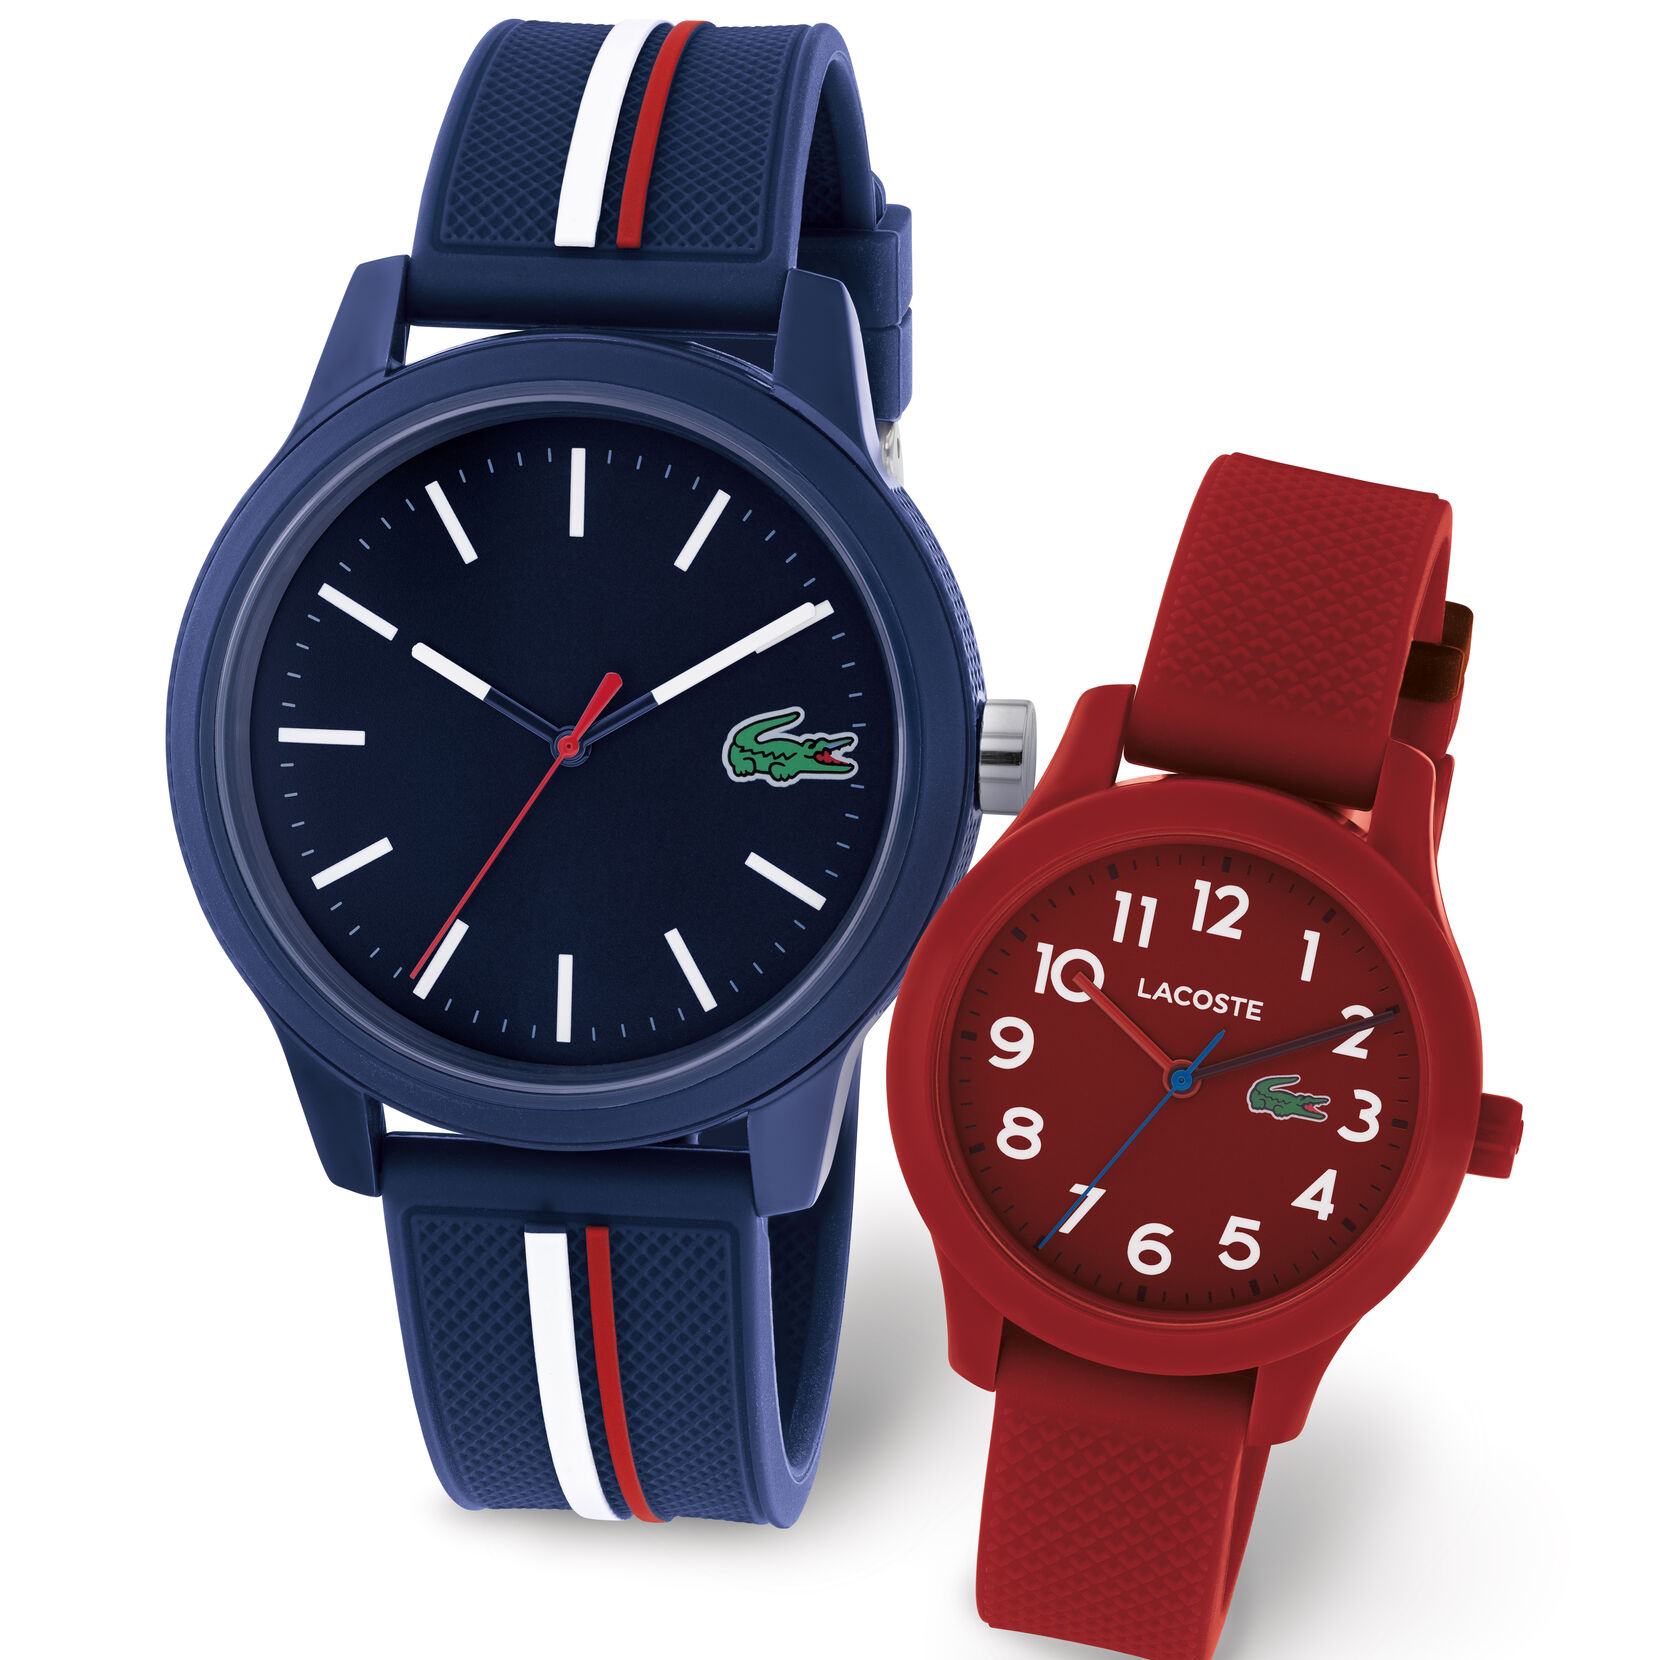 LACOSTE L12.12 MEN’S AND KIDS WATCH GIFT SET, 42MM & 32MM